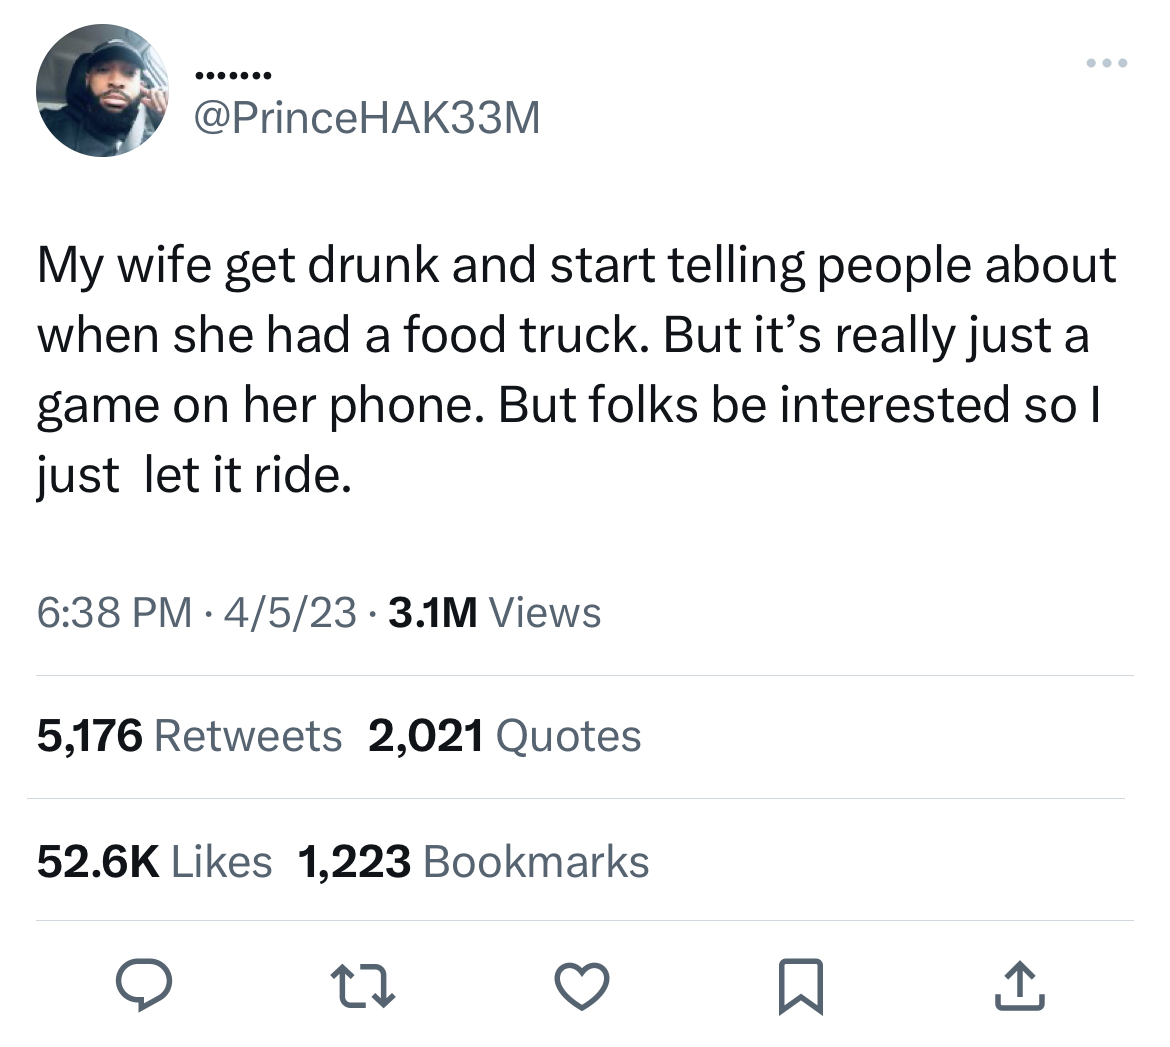 savage and salty tweets - Jessica Walter - My wife get drunk and start telling people about when she had a food truck. But it's really just a game on her phone. But folks be interested so I just let it ride. 45233.1M Views 5,176 2,021 Quotes 1,223 Bookmar